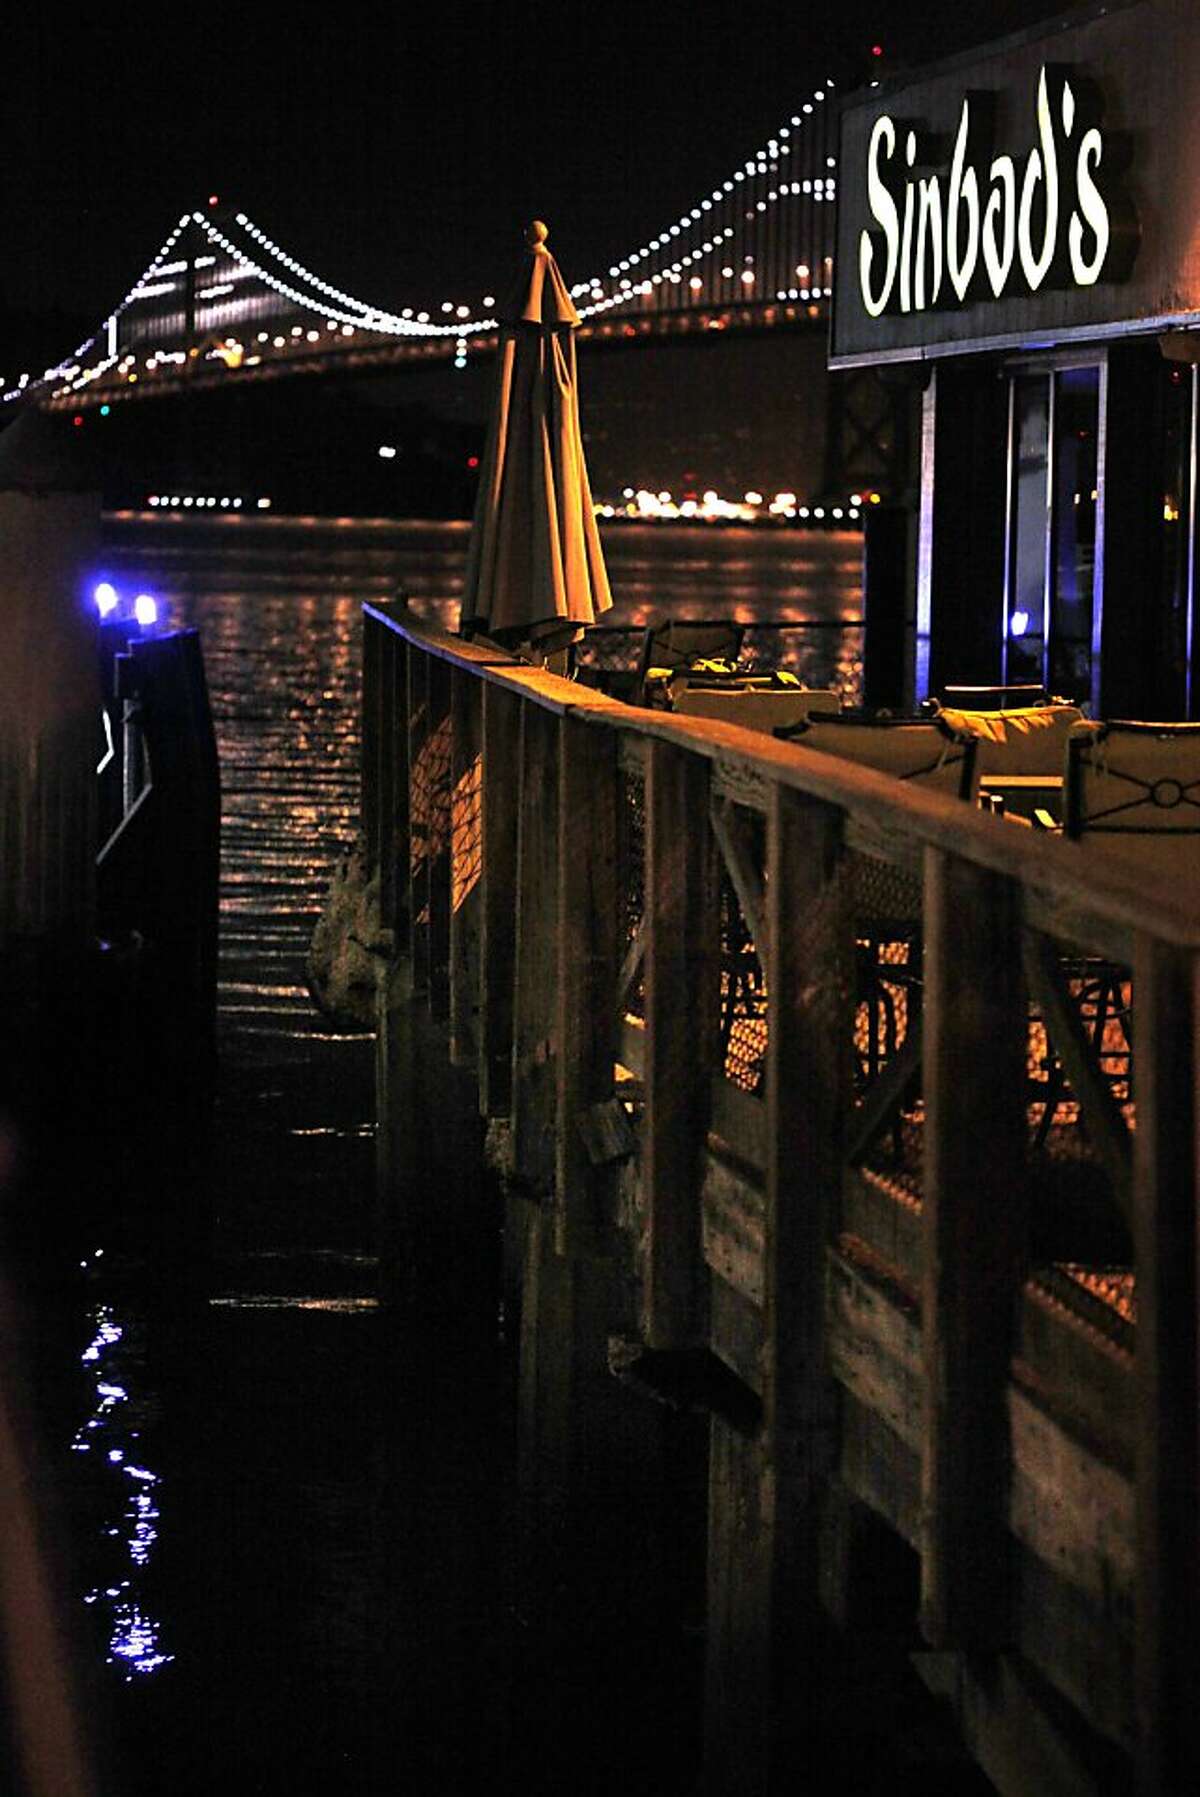 A view of the outside seating area at Sinbad's in San Francisco, Calif., looking towards the bay bridge on Wednesday, November 27, 2013.